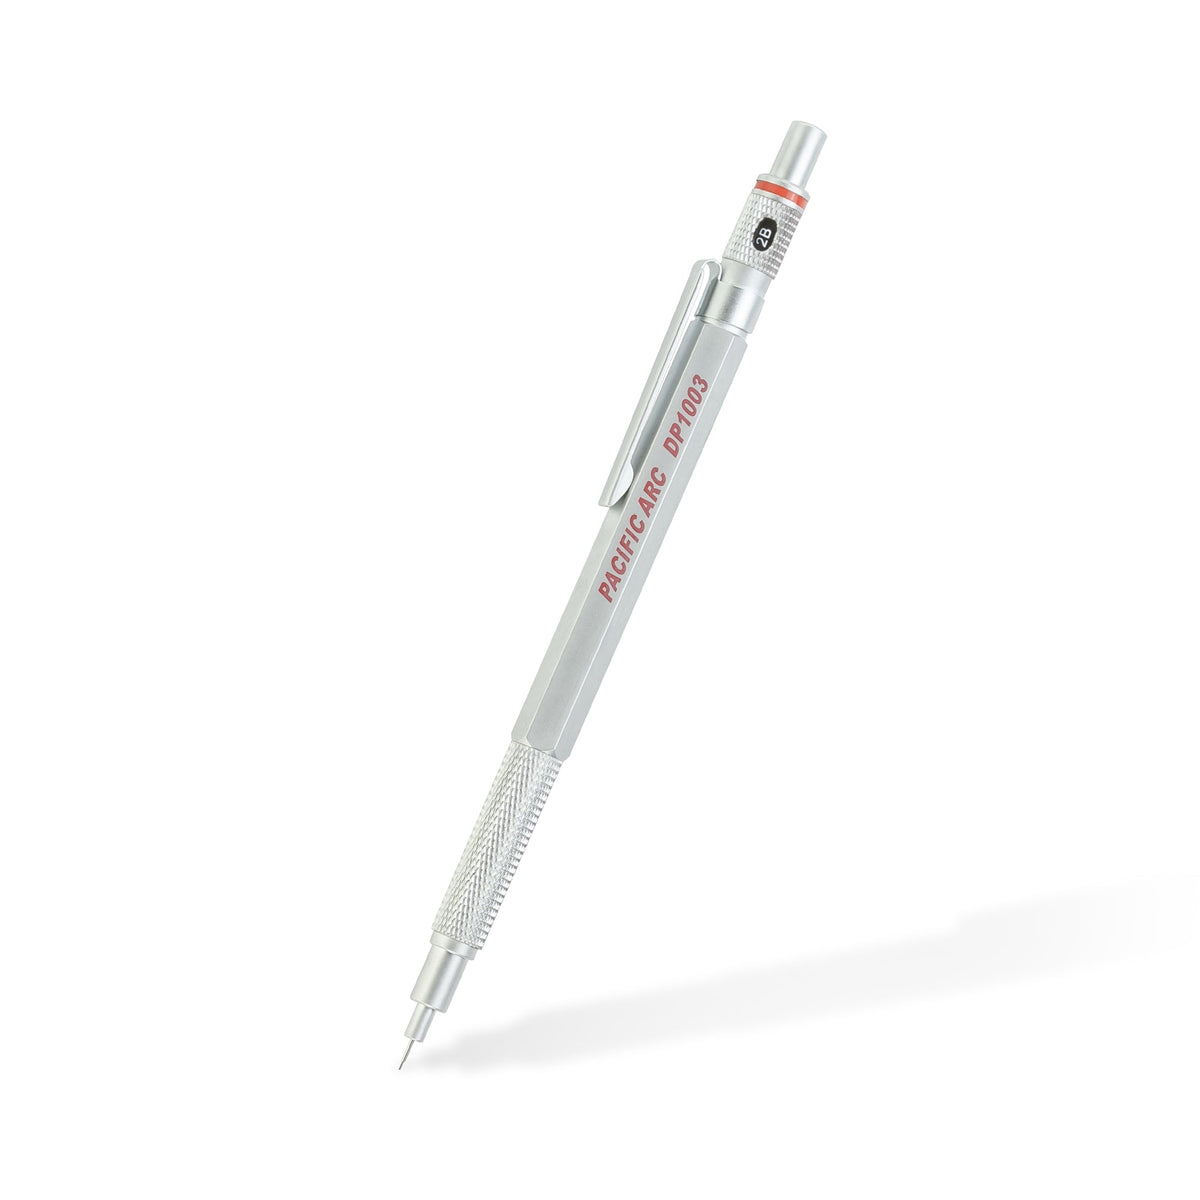 Pacific Arc - Chromograph Metal Mechanical Pencil .9 mm Silver Barrel Mechanical Pencil with Built In Adjustable Pencil Grade, Lead Pencil Holder for Drafting, Sketching, and Drawing